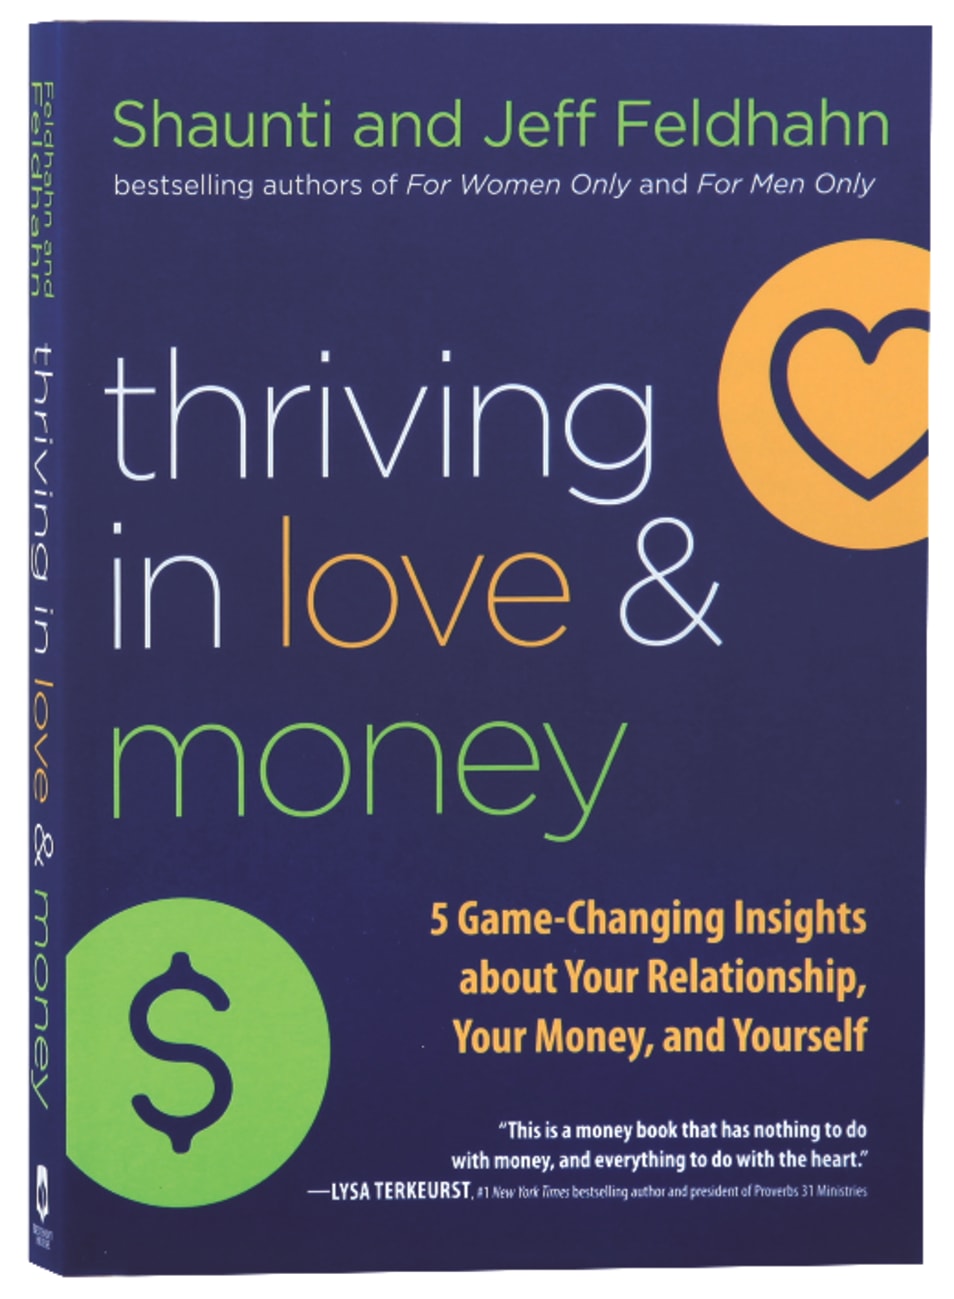 Thriving in Love and Money: 5 Game-Changing Insights About Your Rellationship, Your Money, and Yourself Paperback